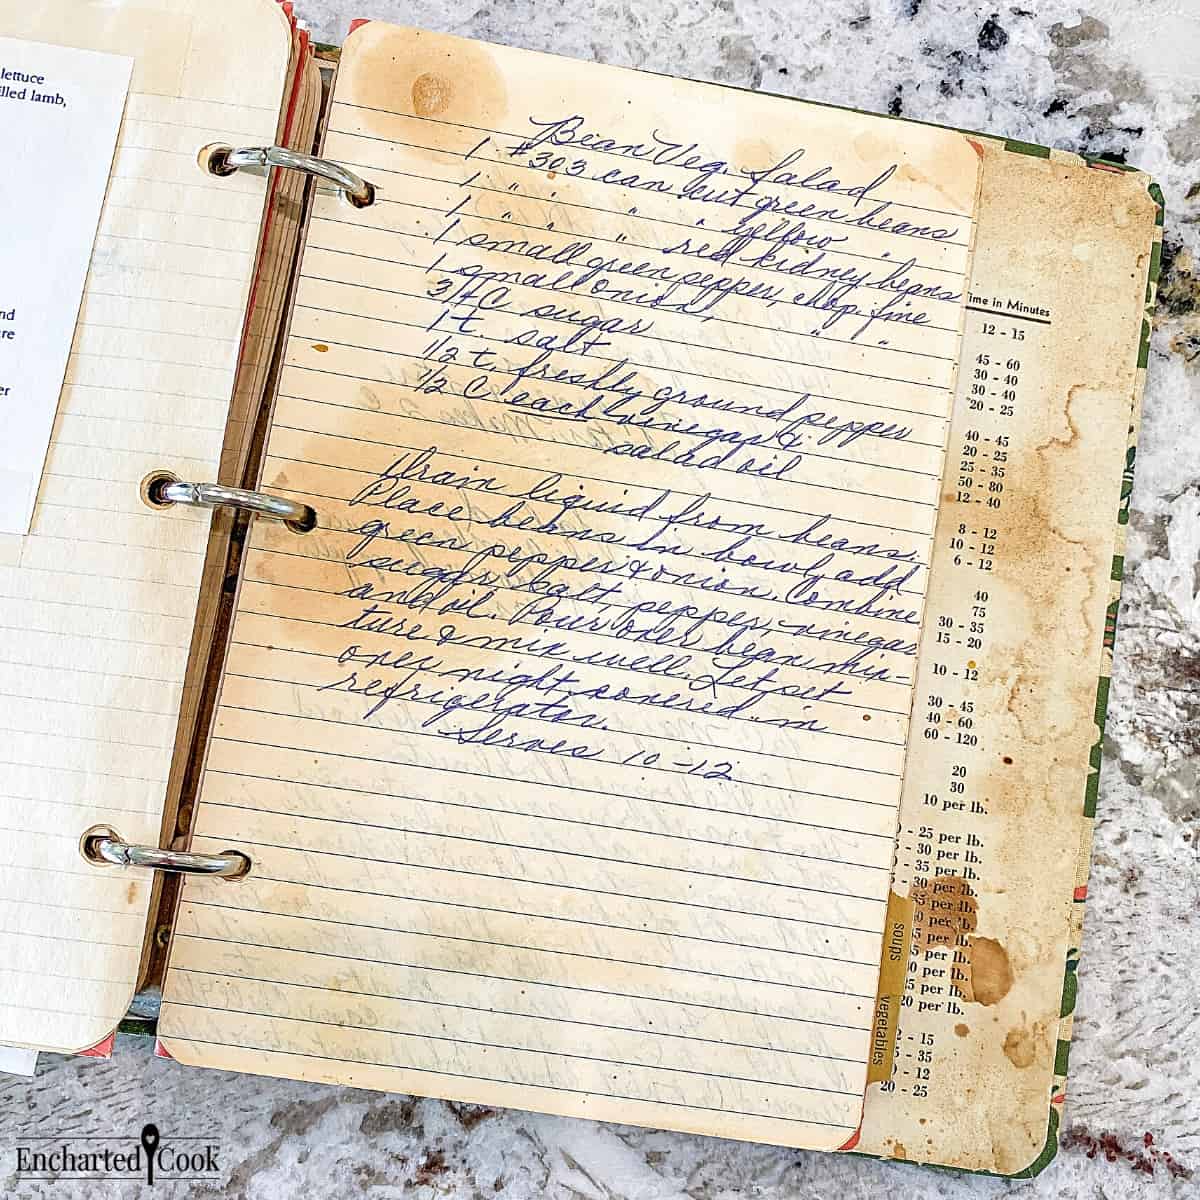 My mom's handwritten bean salad recipe in a 3-ring recipe binder from the 1960s.